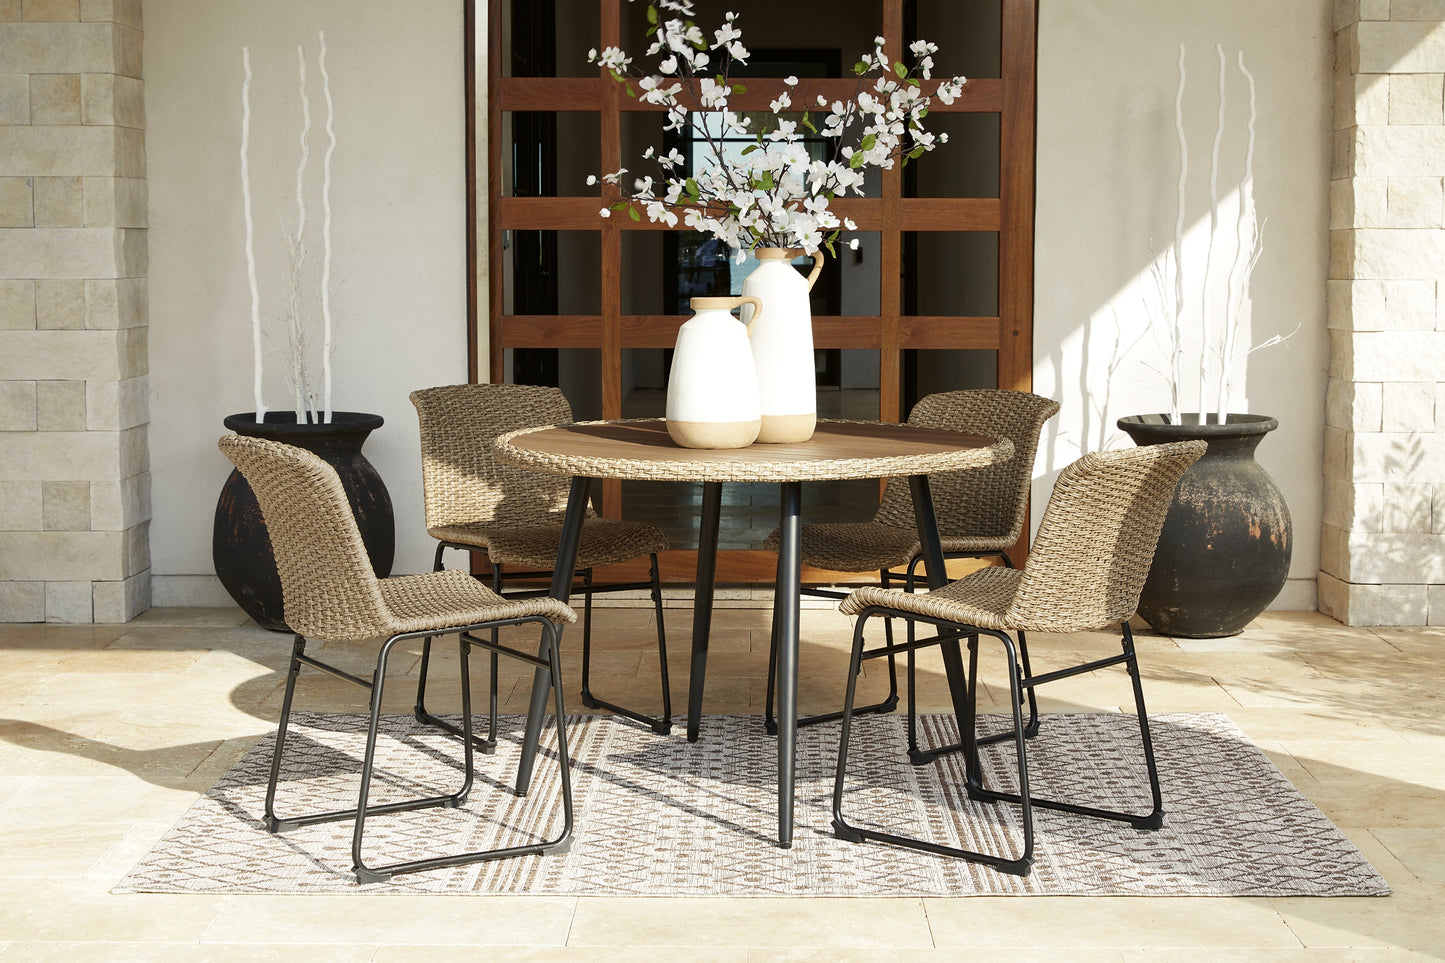 Amaris Outdoor Dining Table and 4 Chairs